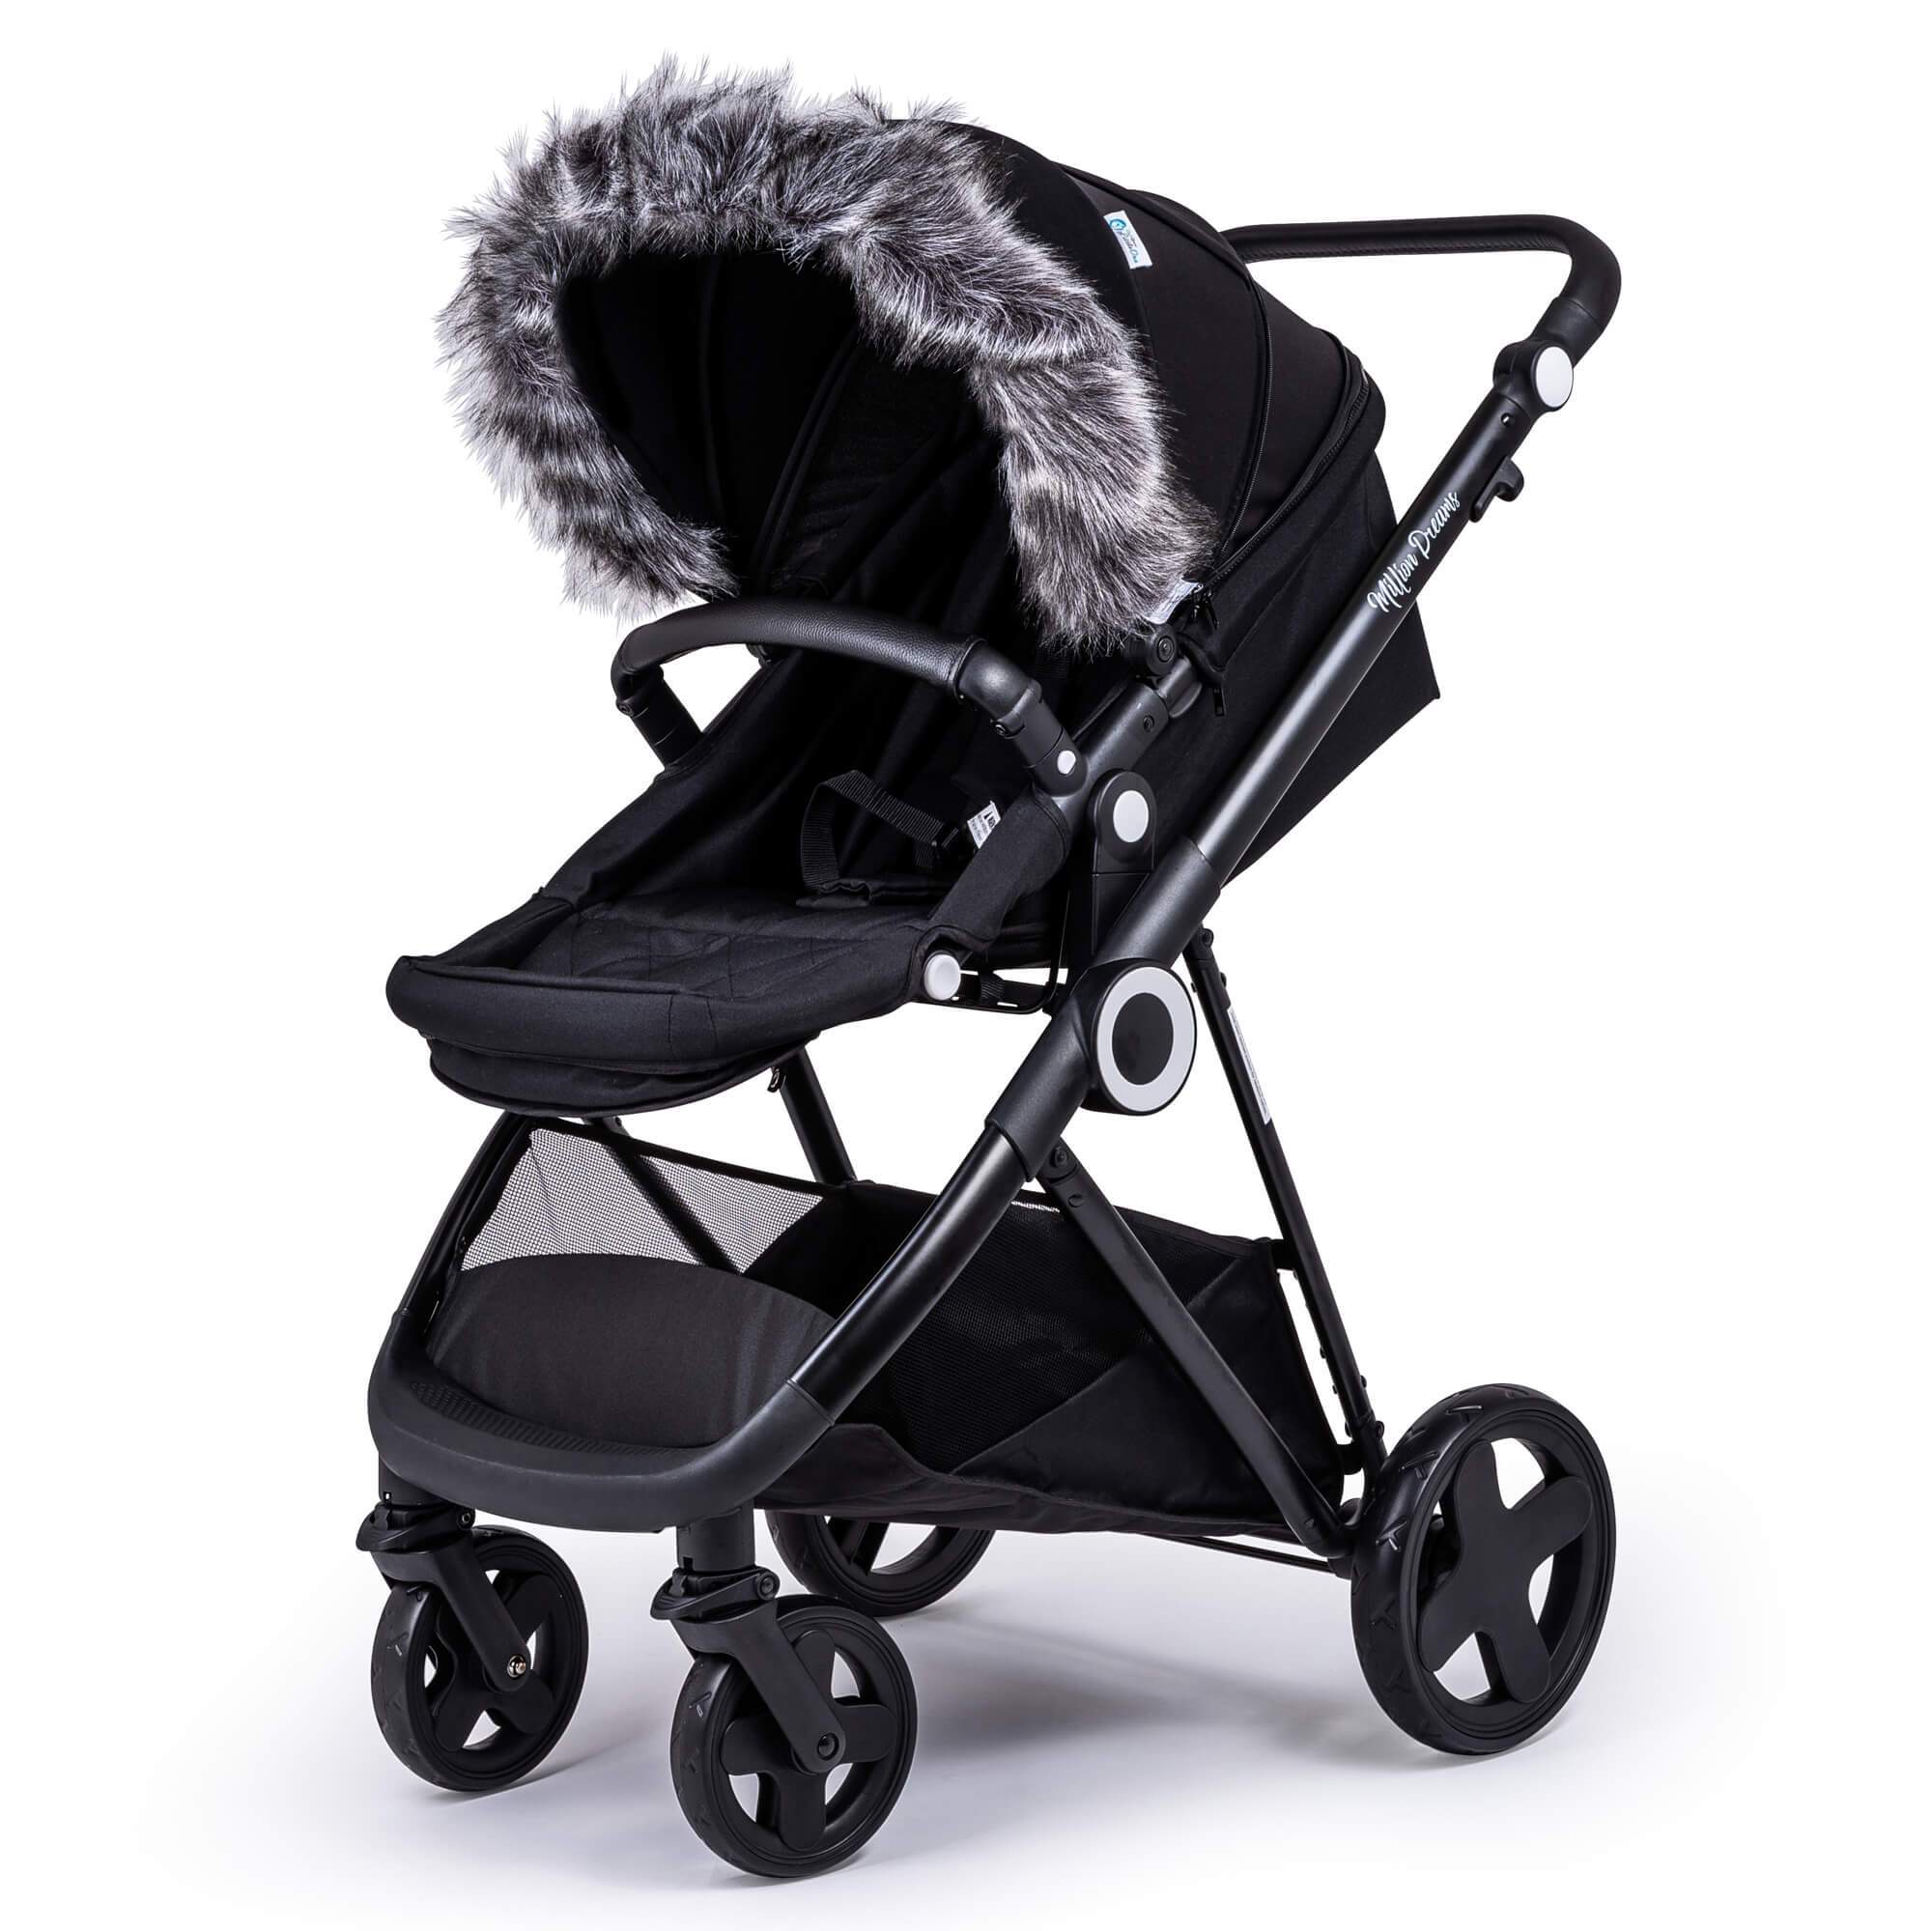 Pram Fur Hood Trim Attachment for Pushchair Compatible with BabySun - Dark Grey / Fits All Models | For Your Little One